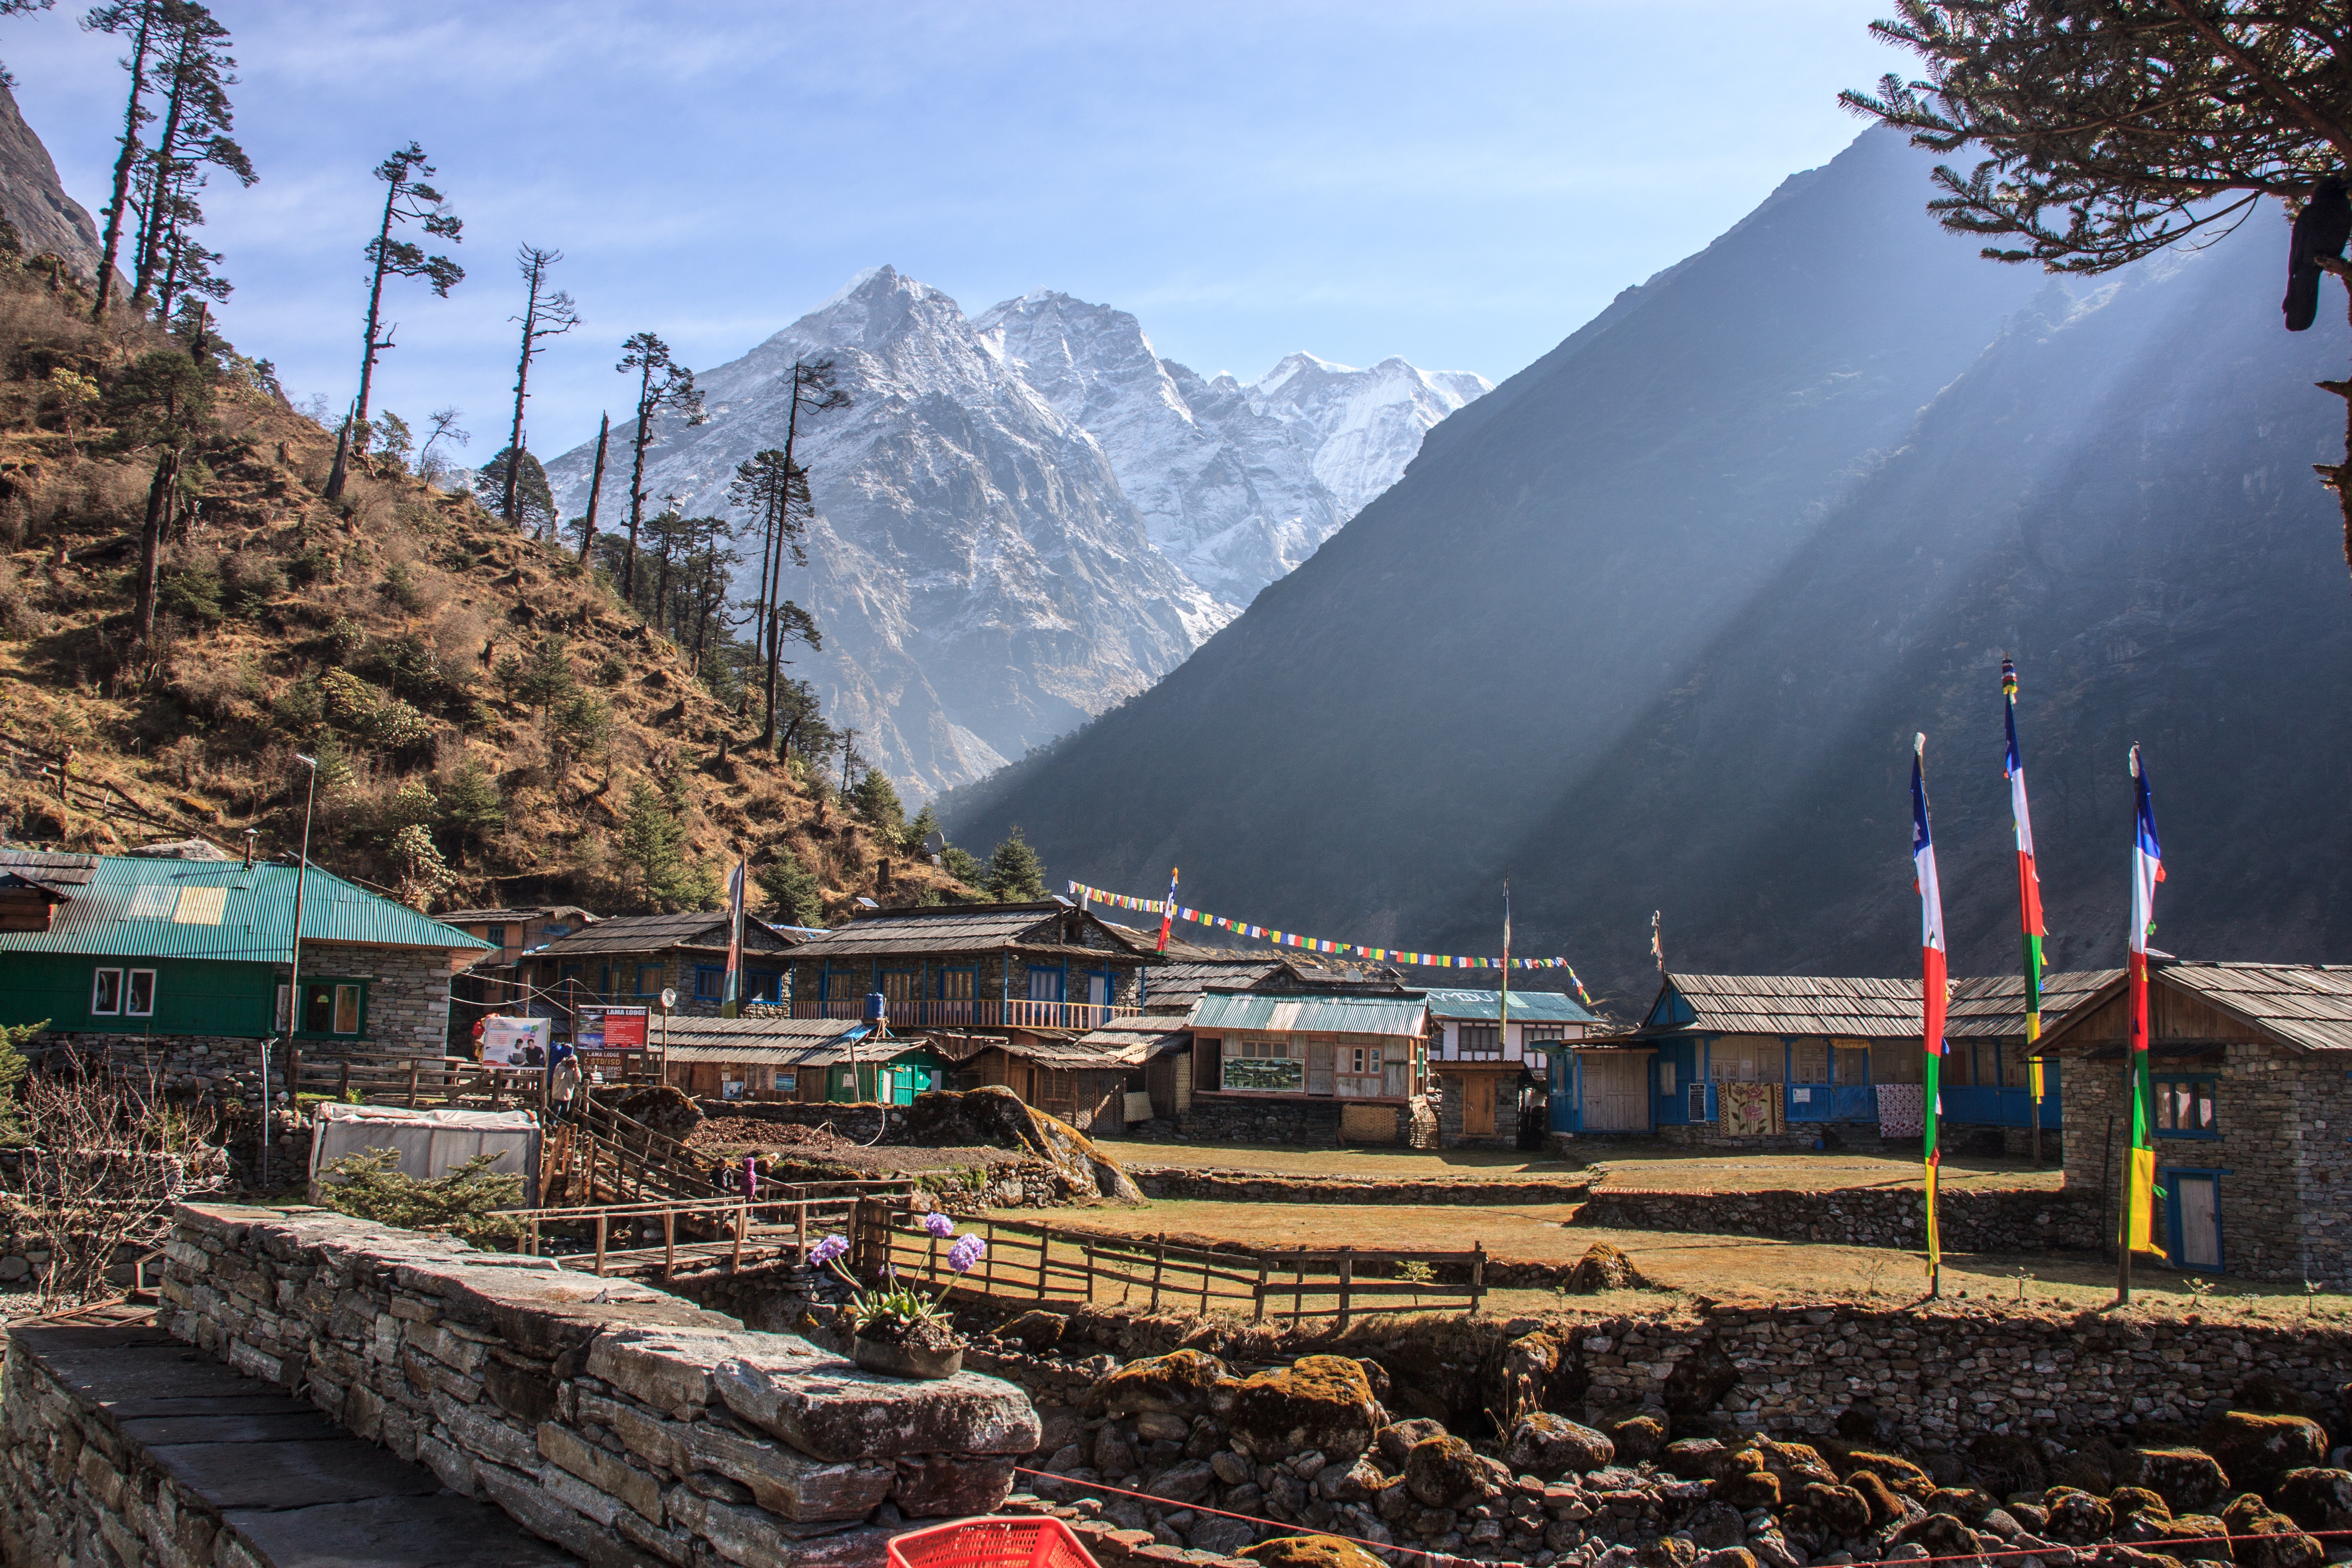 Village of Khote in the Hinku Khola valley on the way to Mera Peak